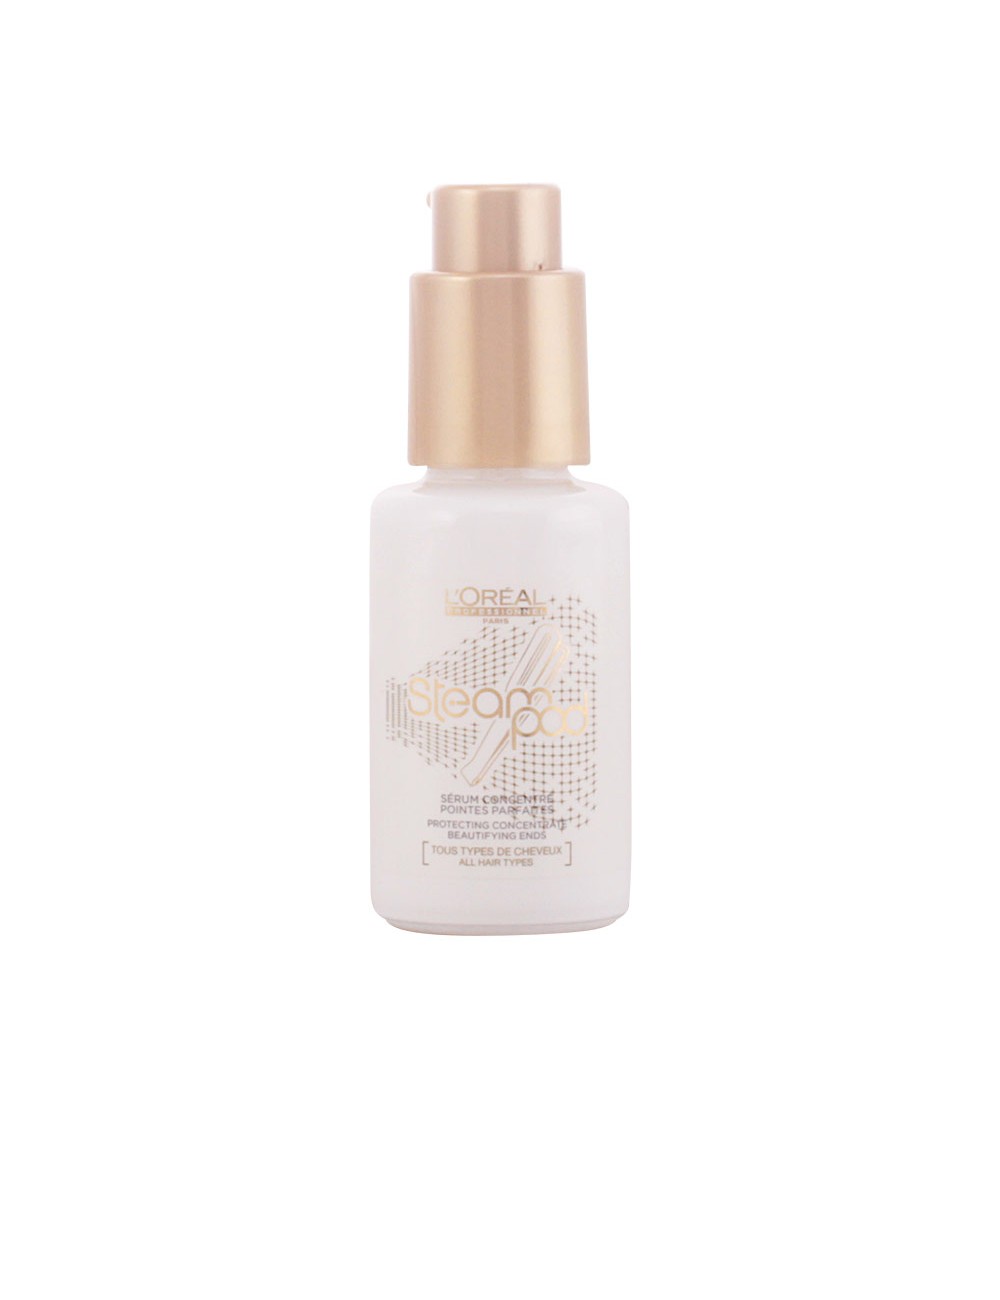 STEAMPOD protecting concentrate serum 50 ml